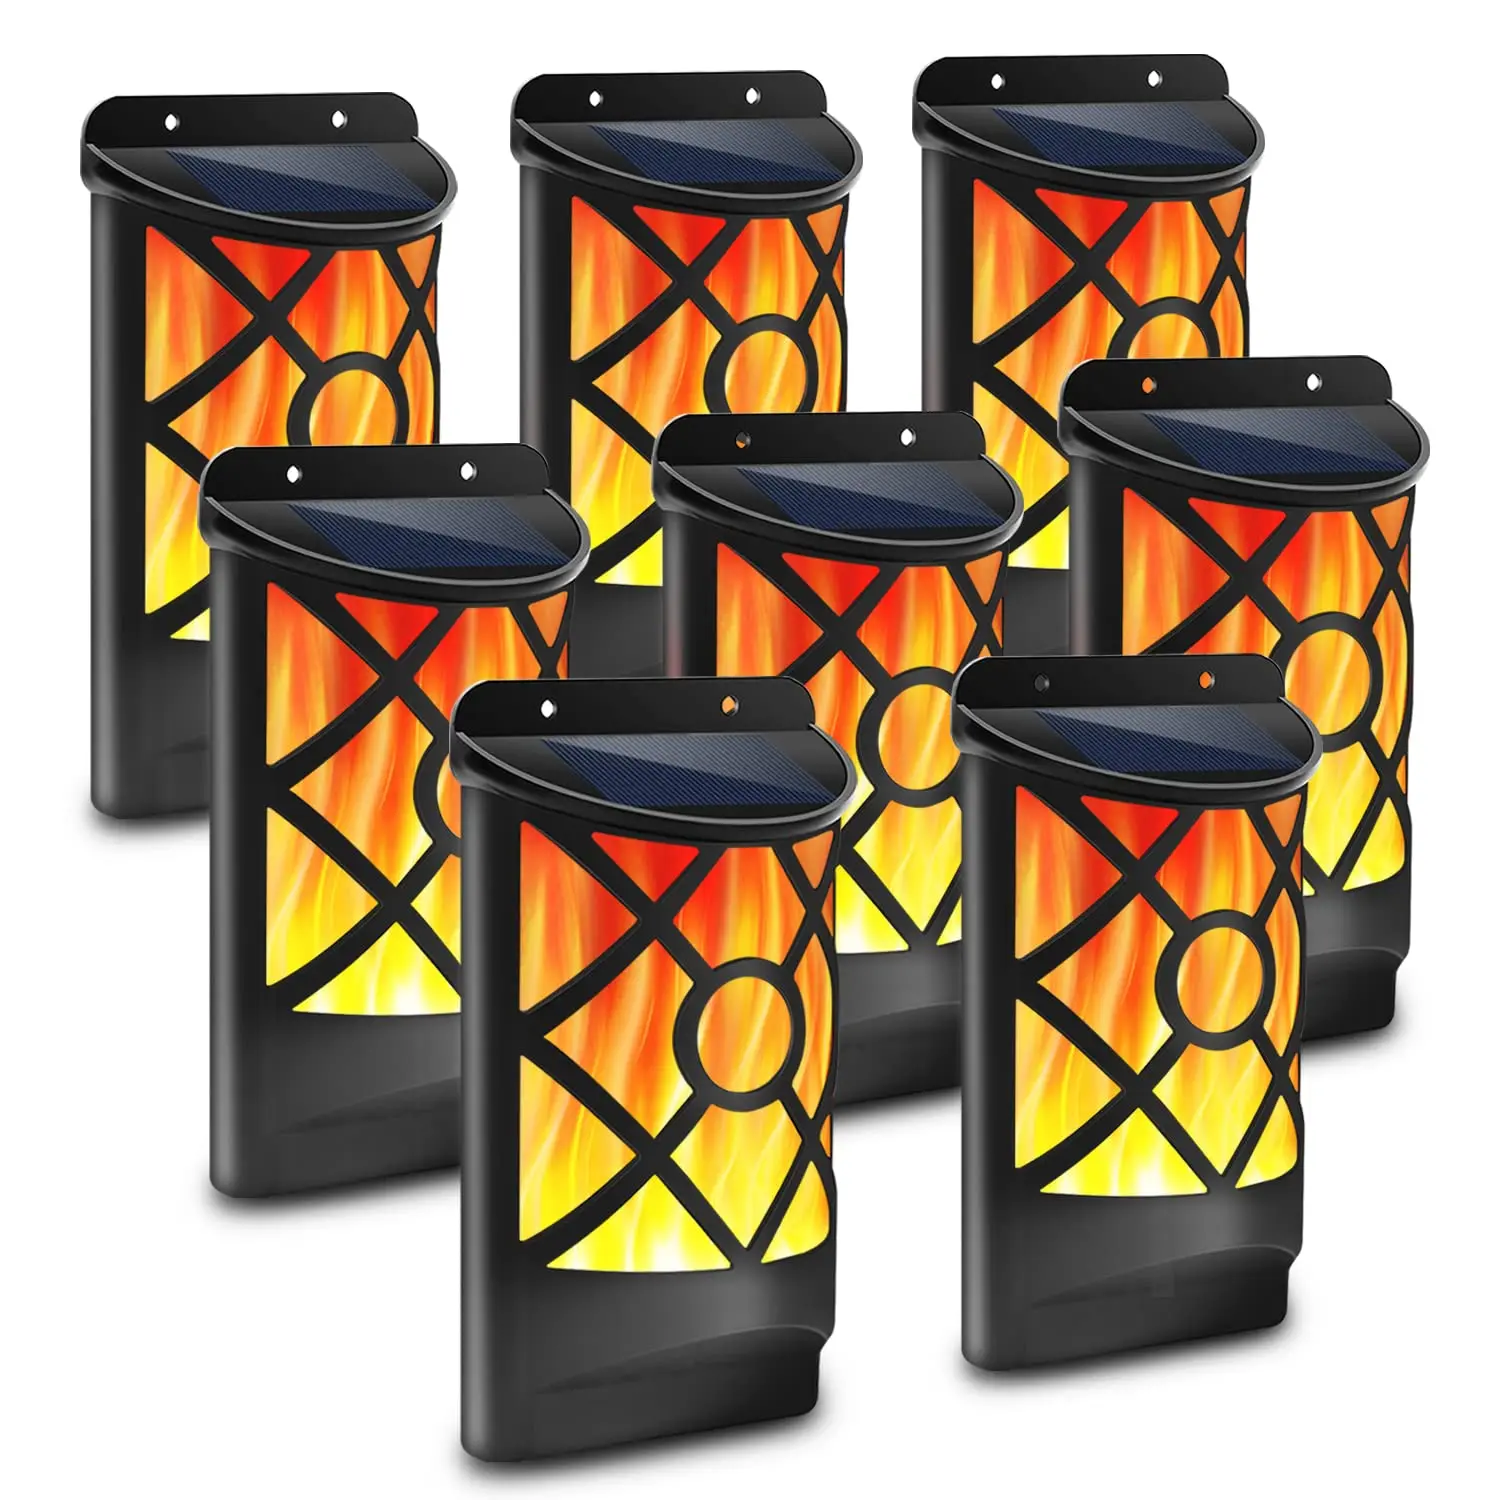 

1-8pc Solar Flame Lights Outdoor Wall Mounted Waterproof Flickering Flame Solar Lights Torch Wall Sconce for Patio Deck Driveway